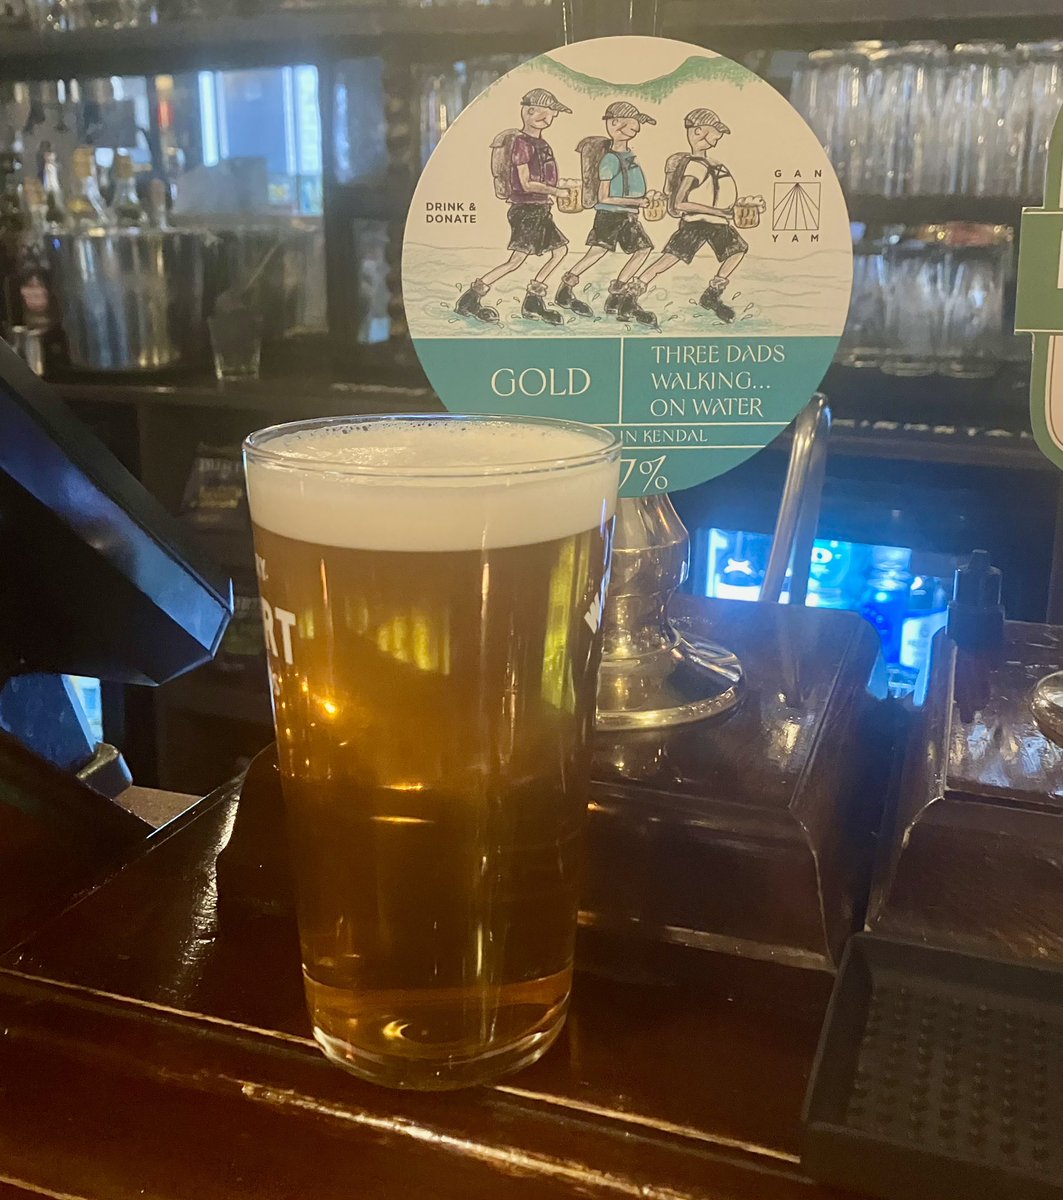 Great that the famous @WhitelocksLeeds #Leeds is supporting @3dadswalking by serving @ganyambrew 3 Dads Walking on Water & serving Black Cat 3 Dads gin as a special! 👏 I enjoyed a much needed pint after todays leg of the Walk of Hope 2024! 🥾🍺 #3DadsWalking #SuicidePrevention